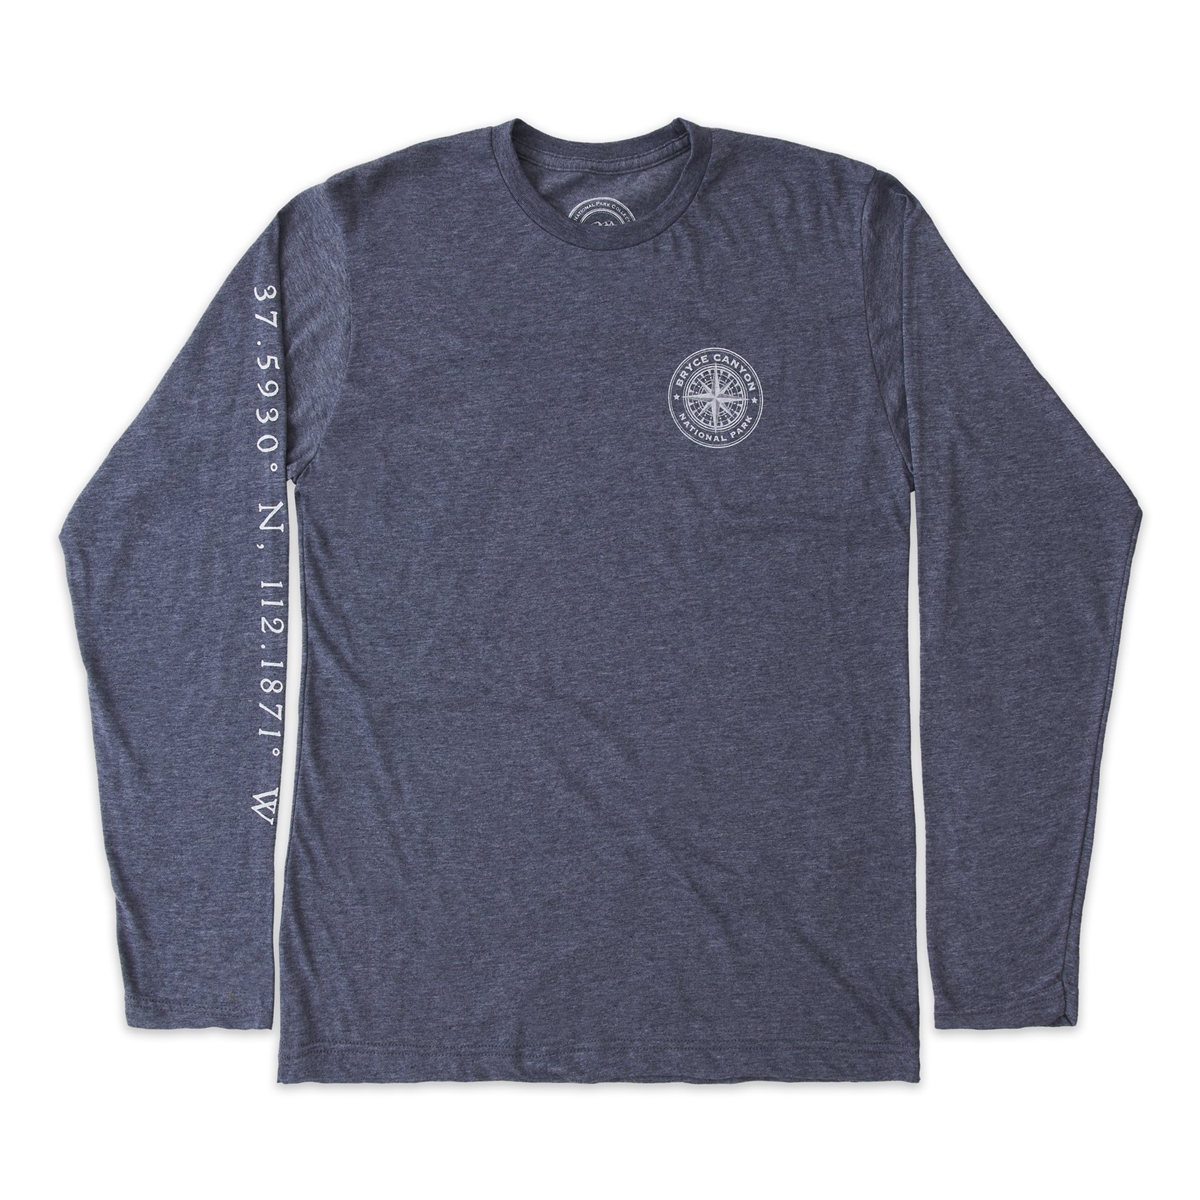 Bryce Canyon National Park Long Sleeve Unisex Tee with Map and Compass